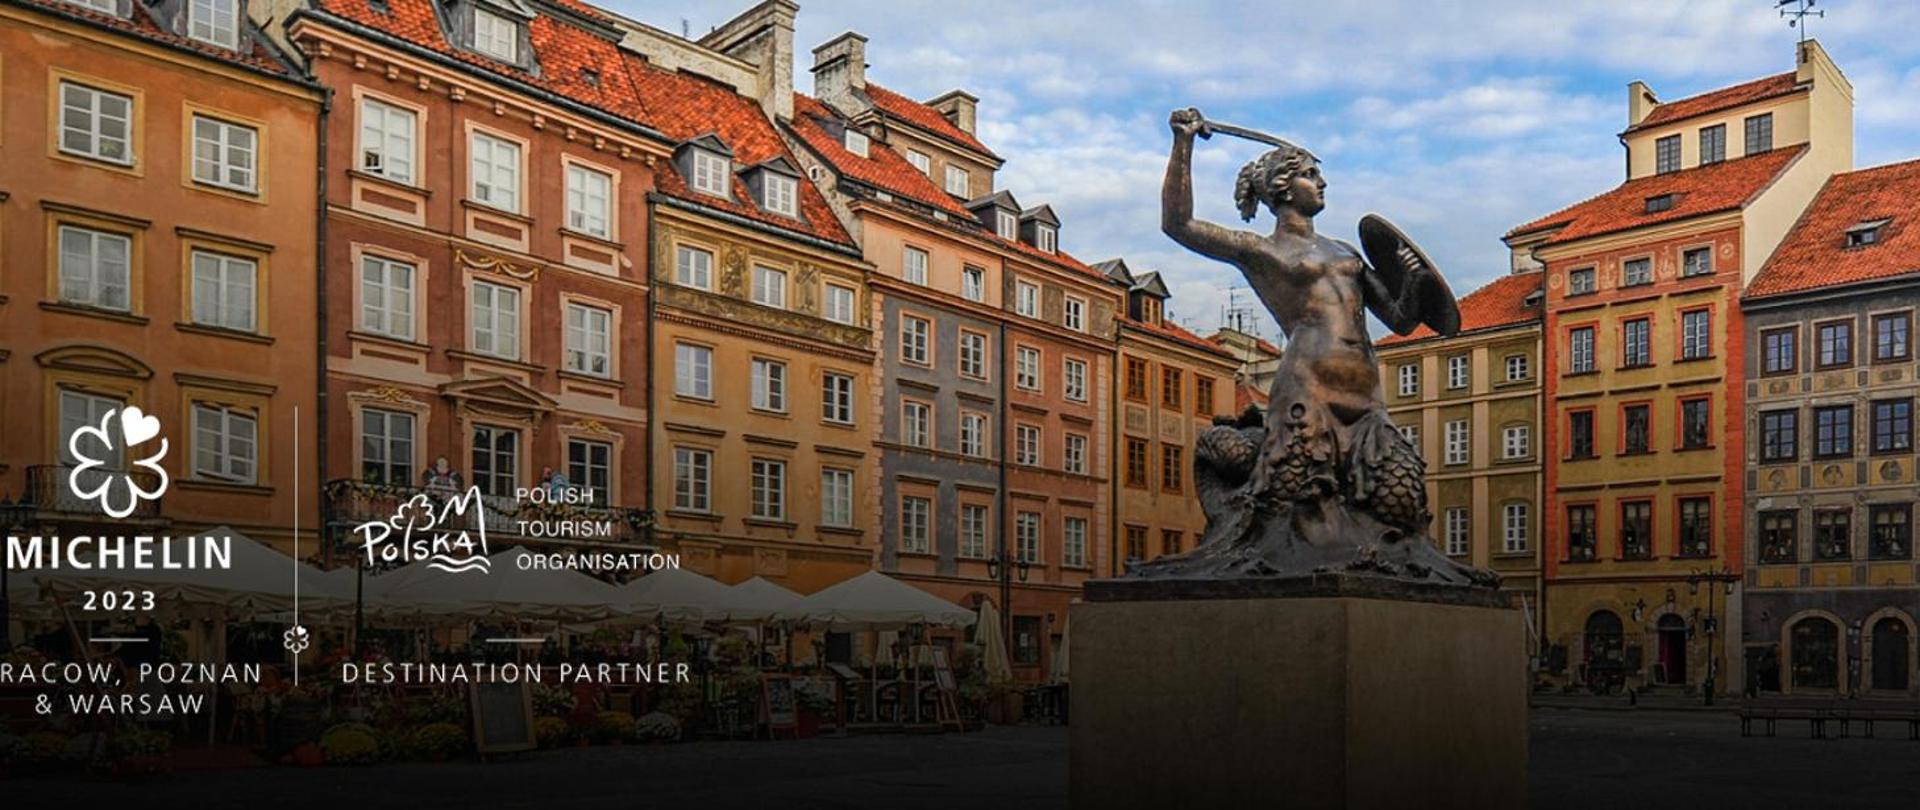 a view of Warsaw Market Square with a monument of Sirene - the emblem of Warsaw, the capital city of Poland